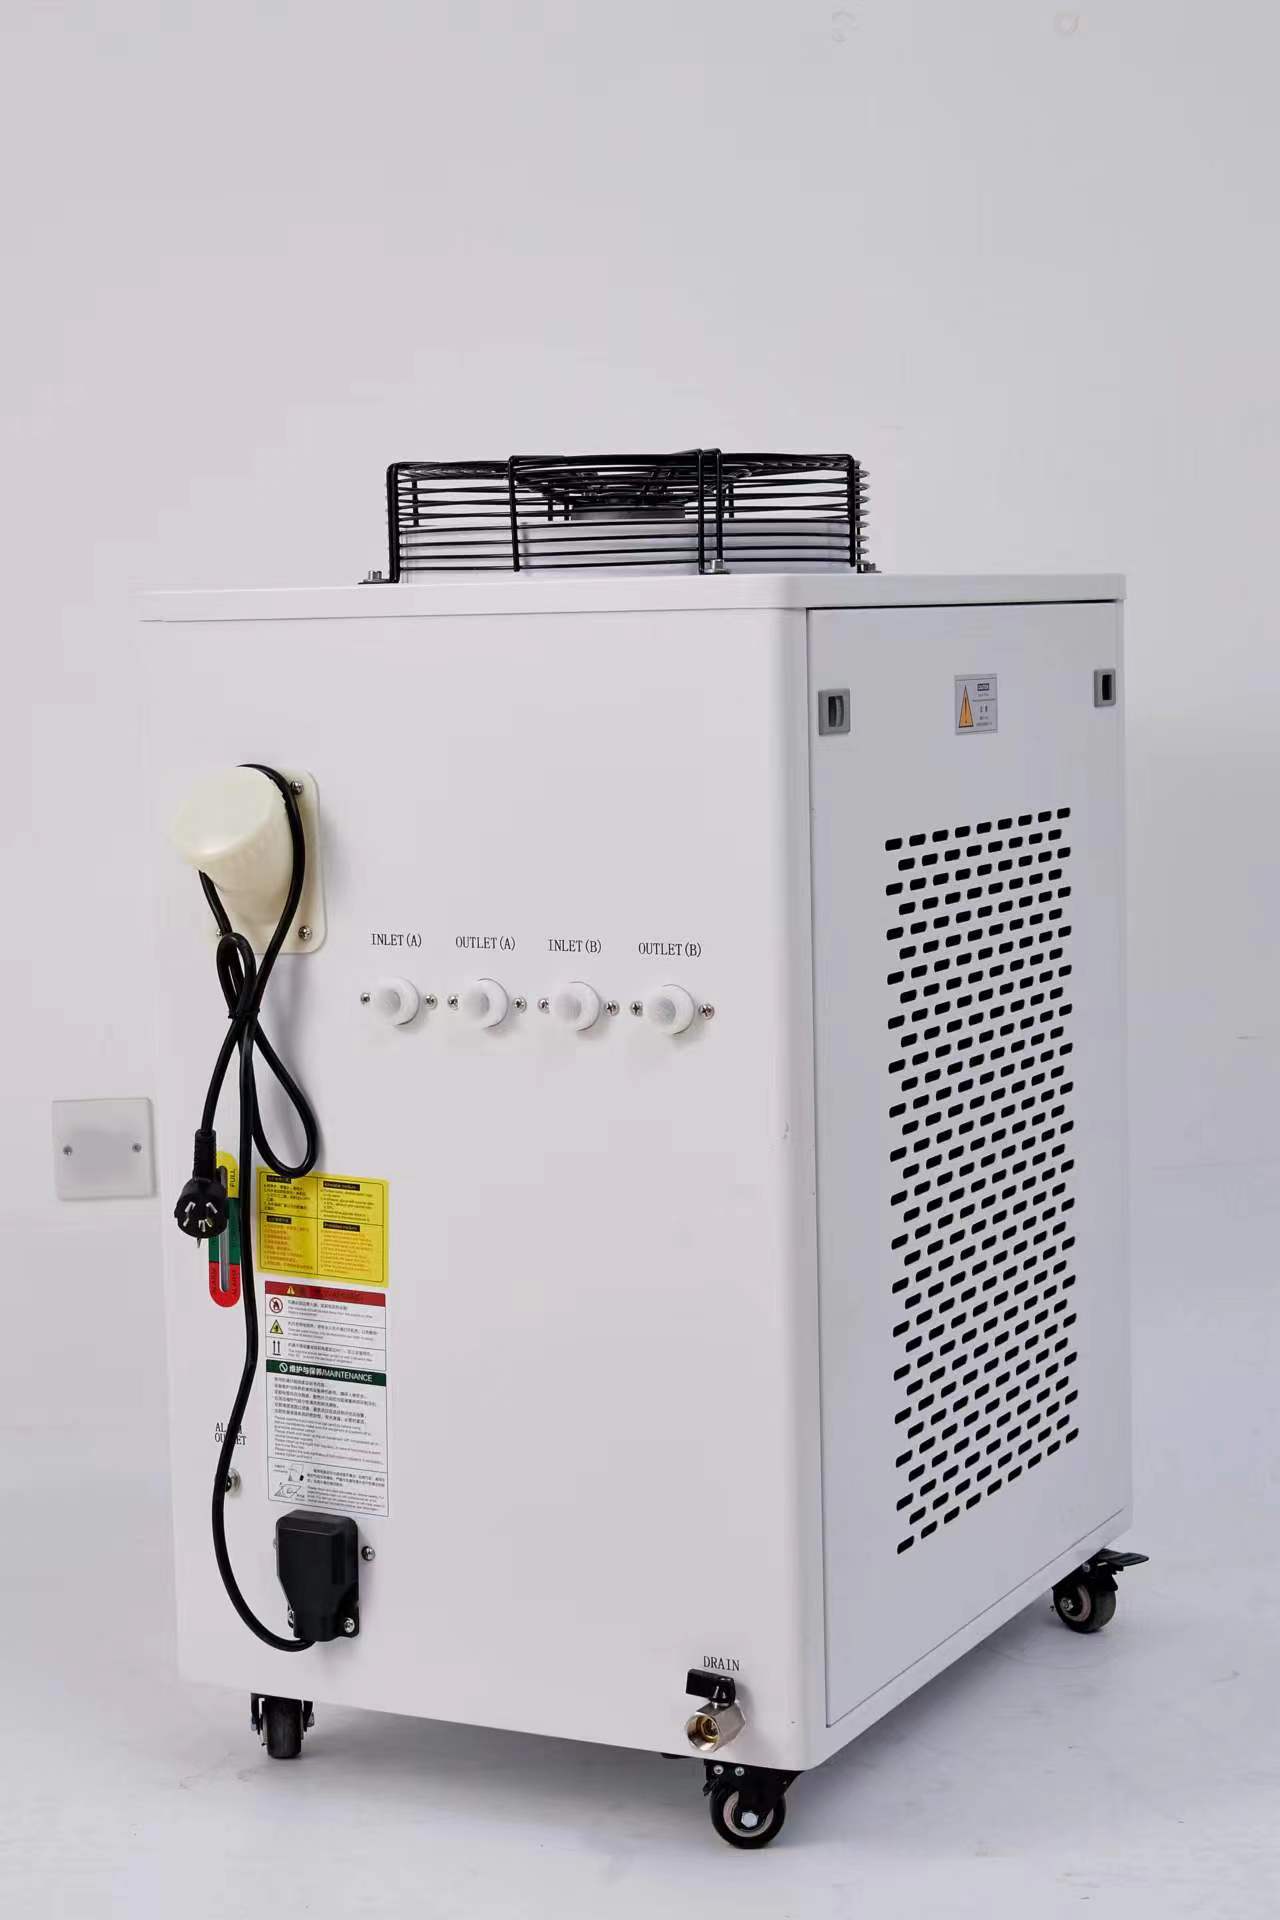 CW-5200 Water Cooling Chiller